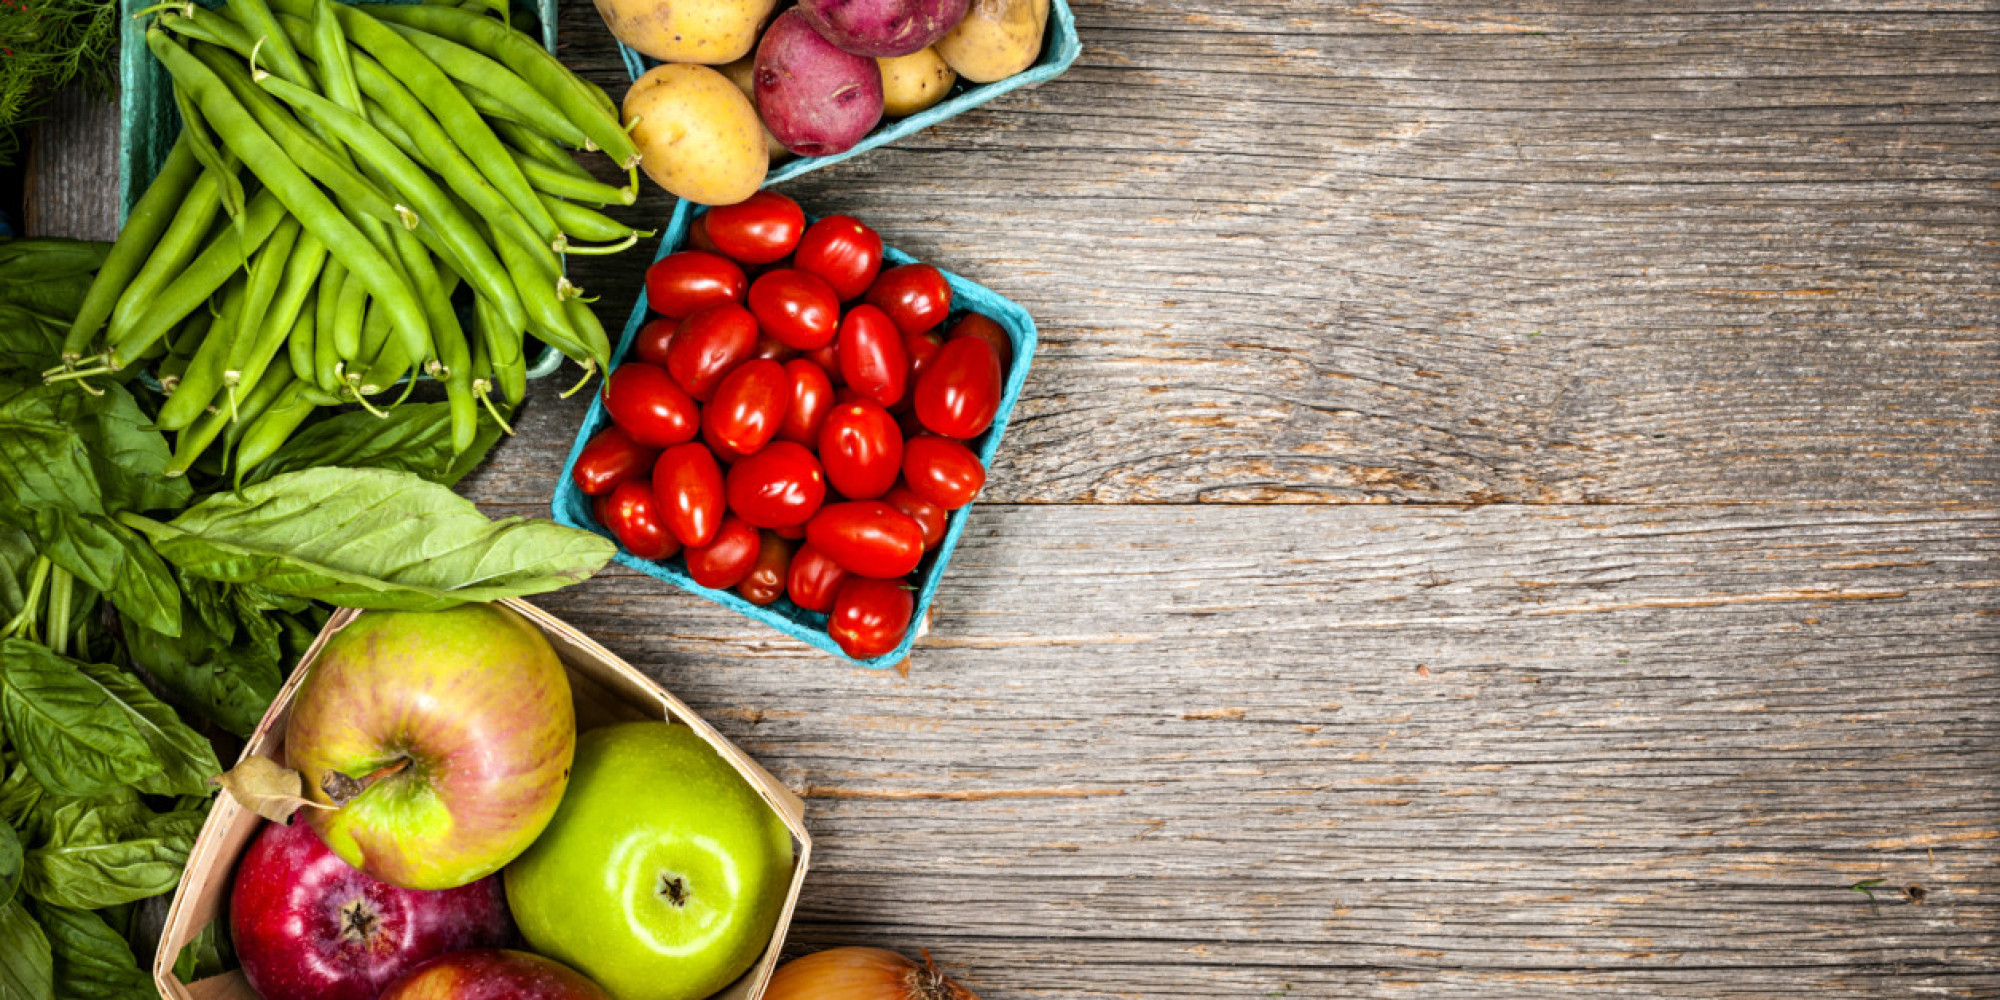 Does Paying for Organic Food Delivery Make Cents? | HuffPost